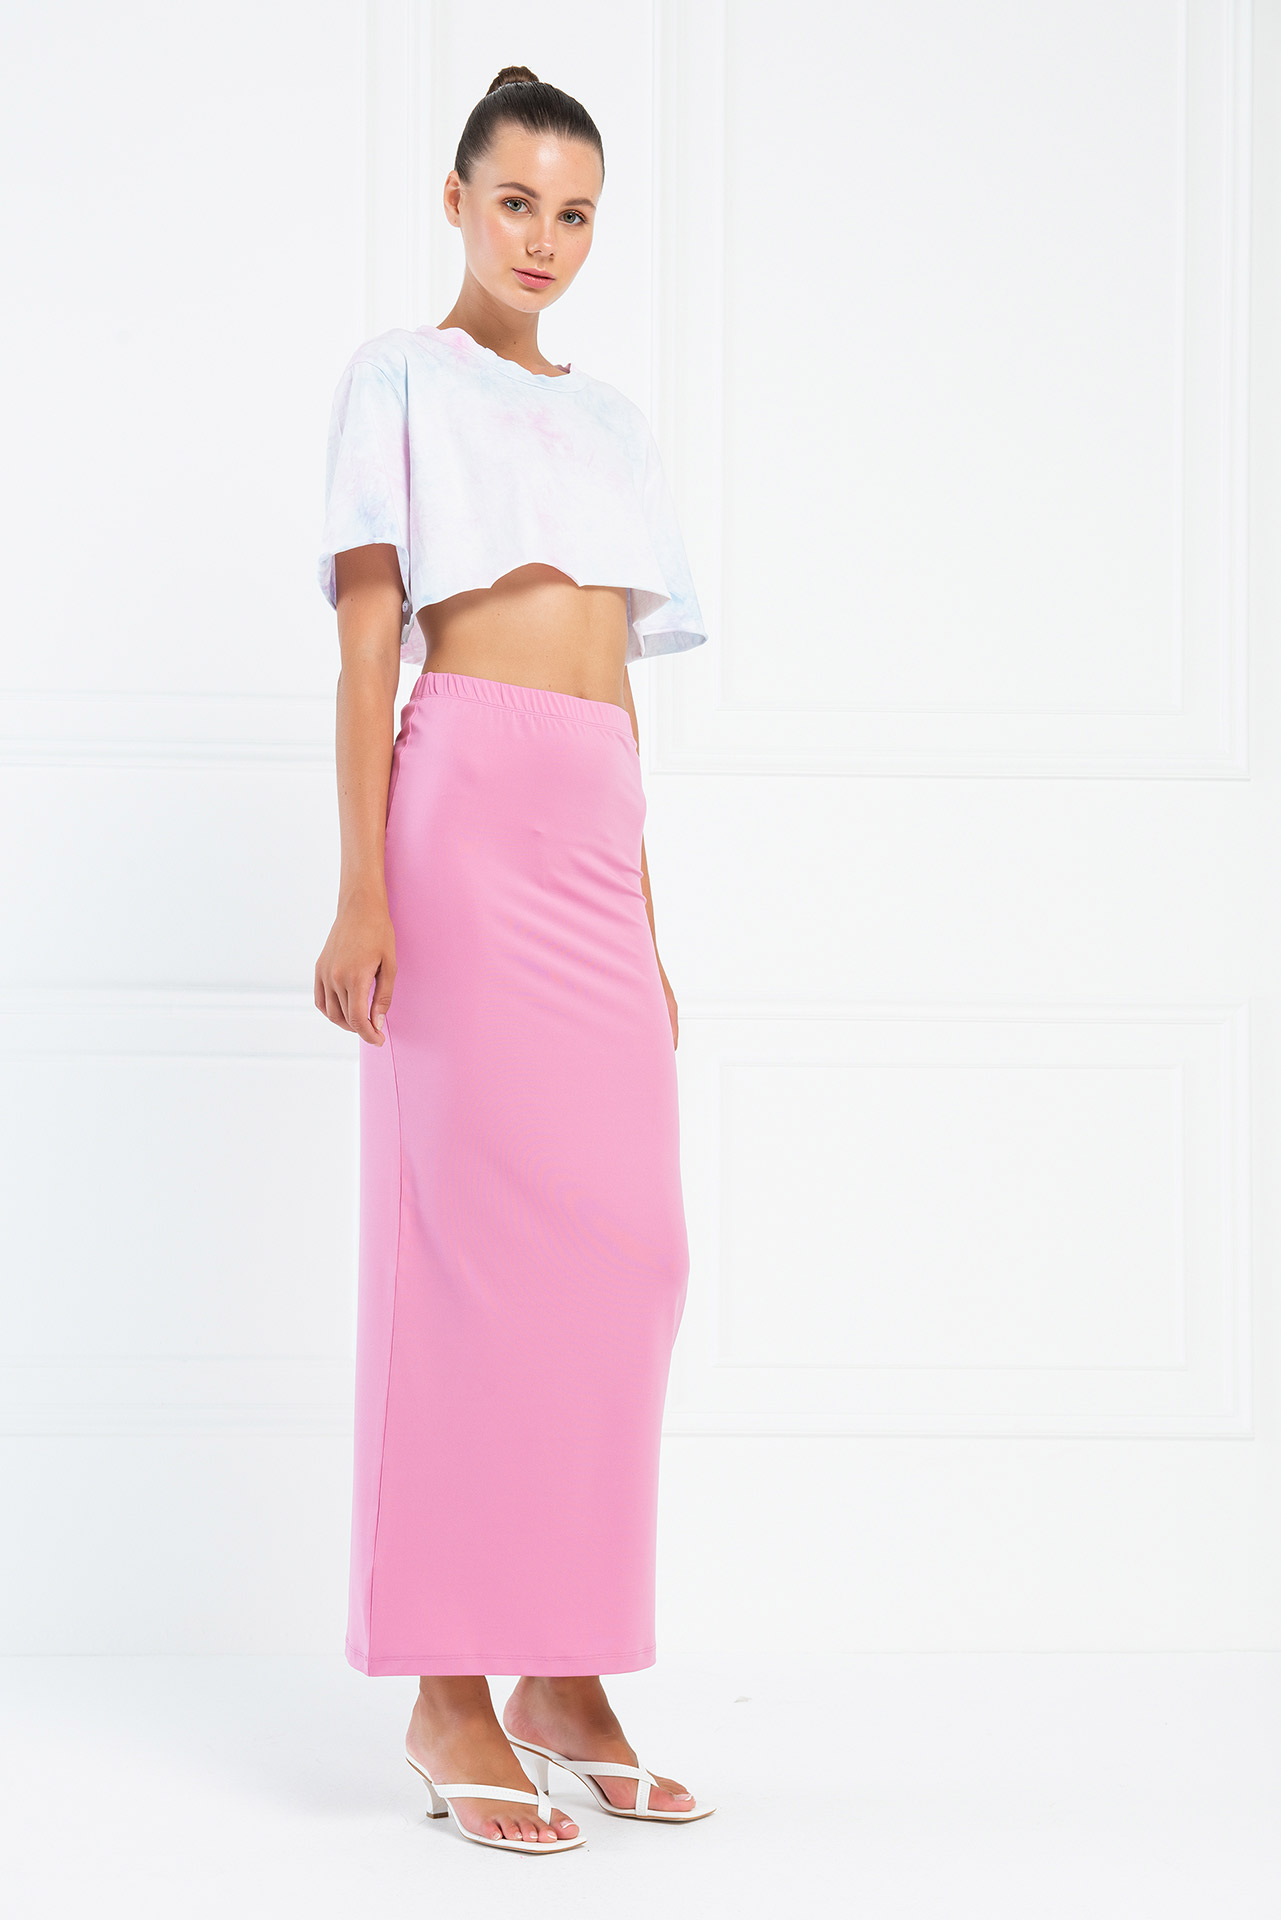 Doly Pink Maxi Skirt